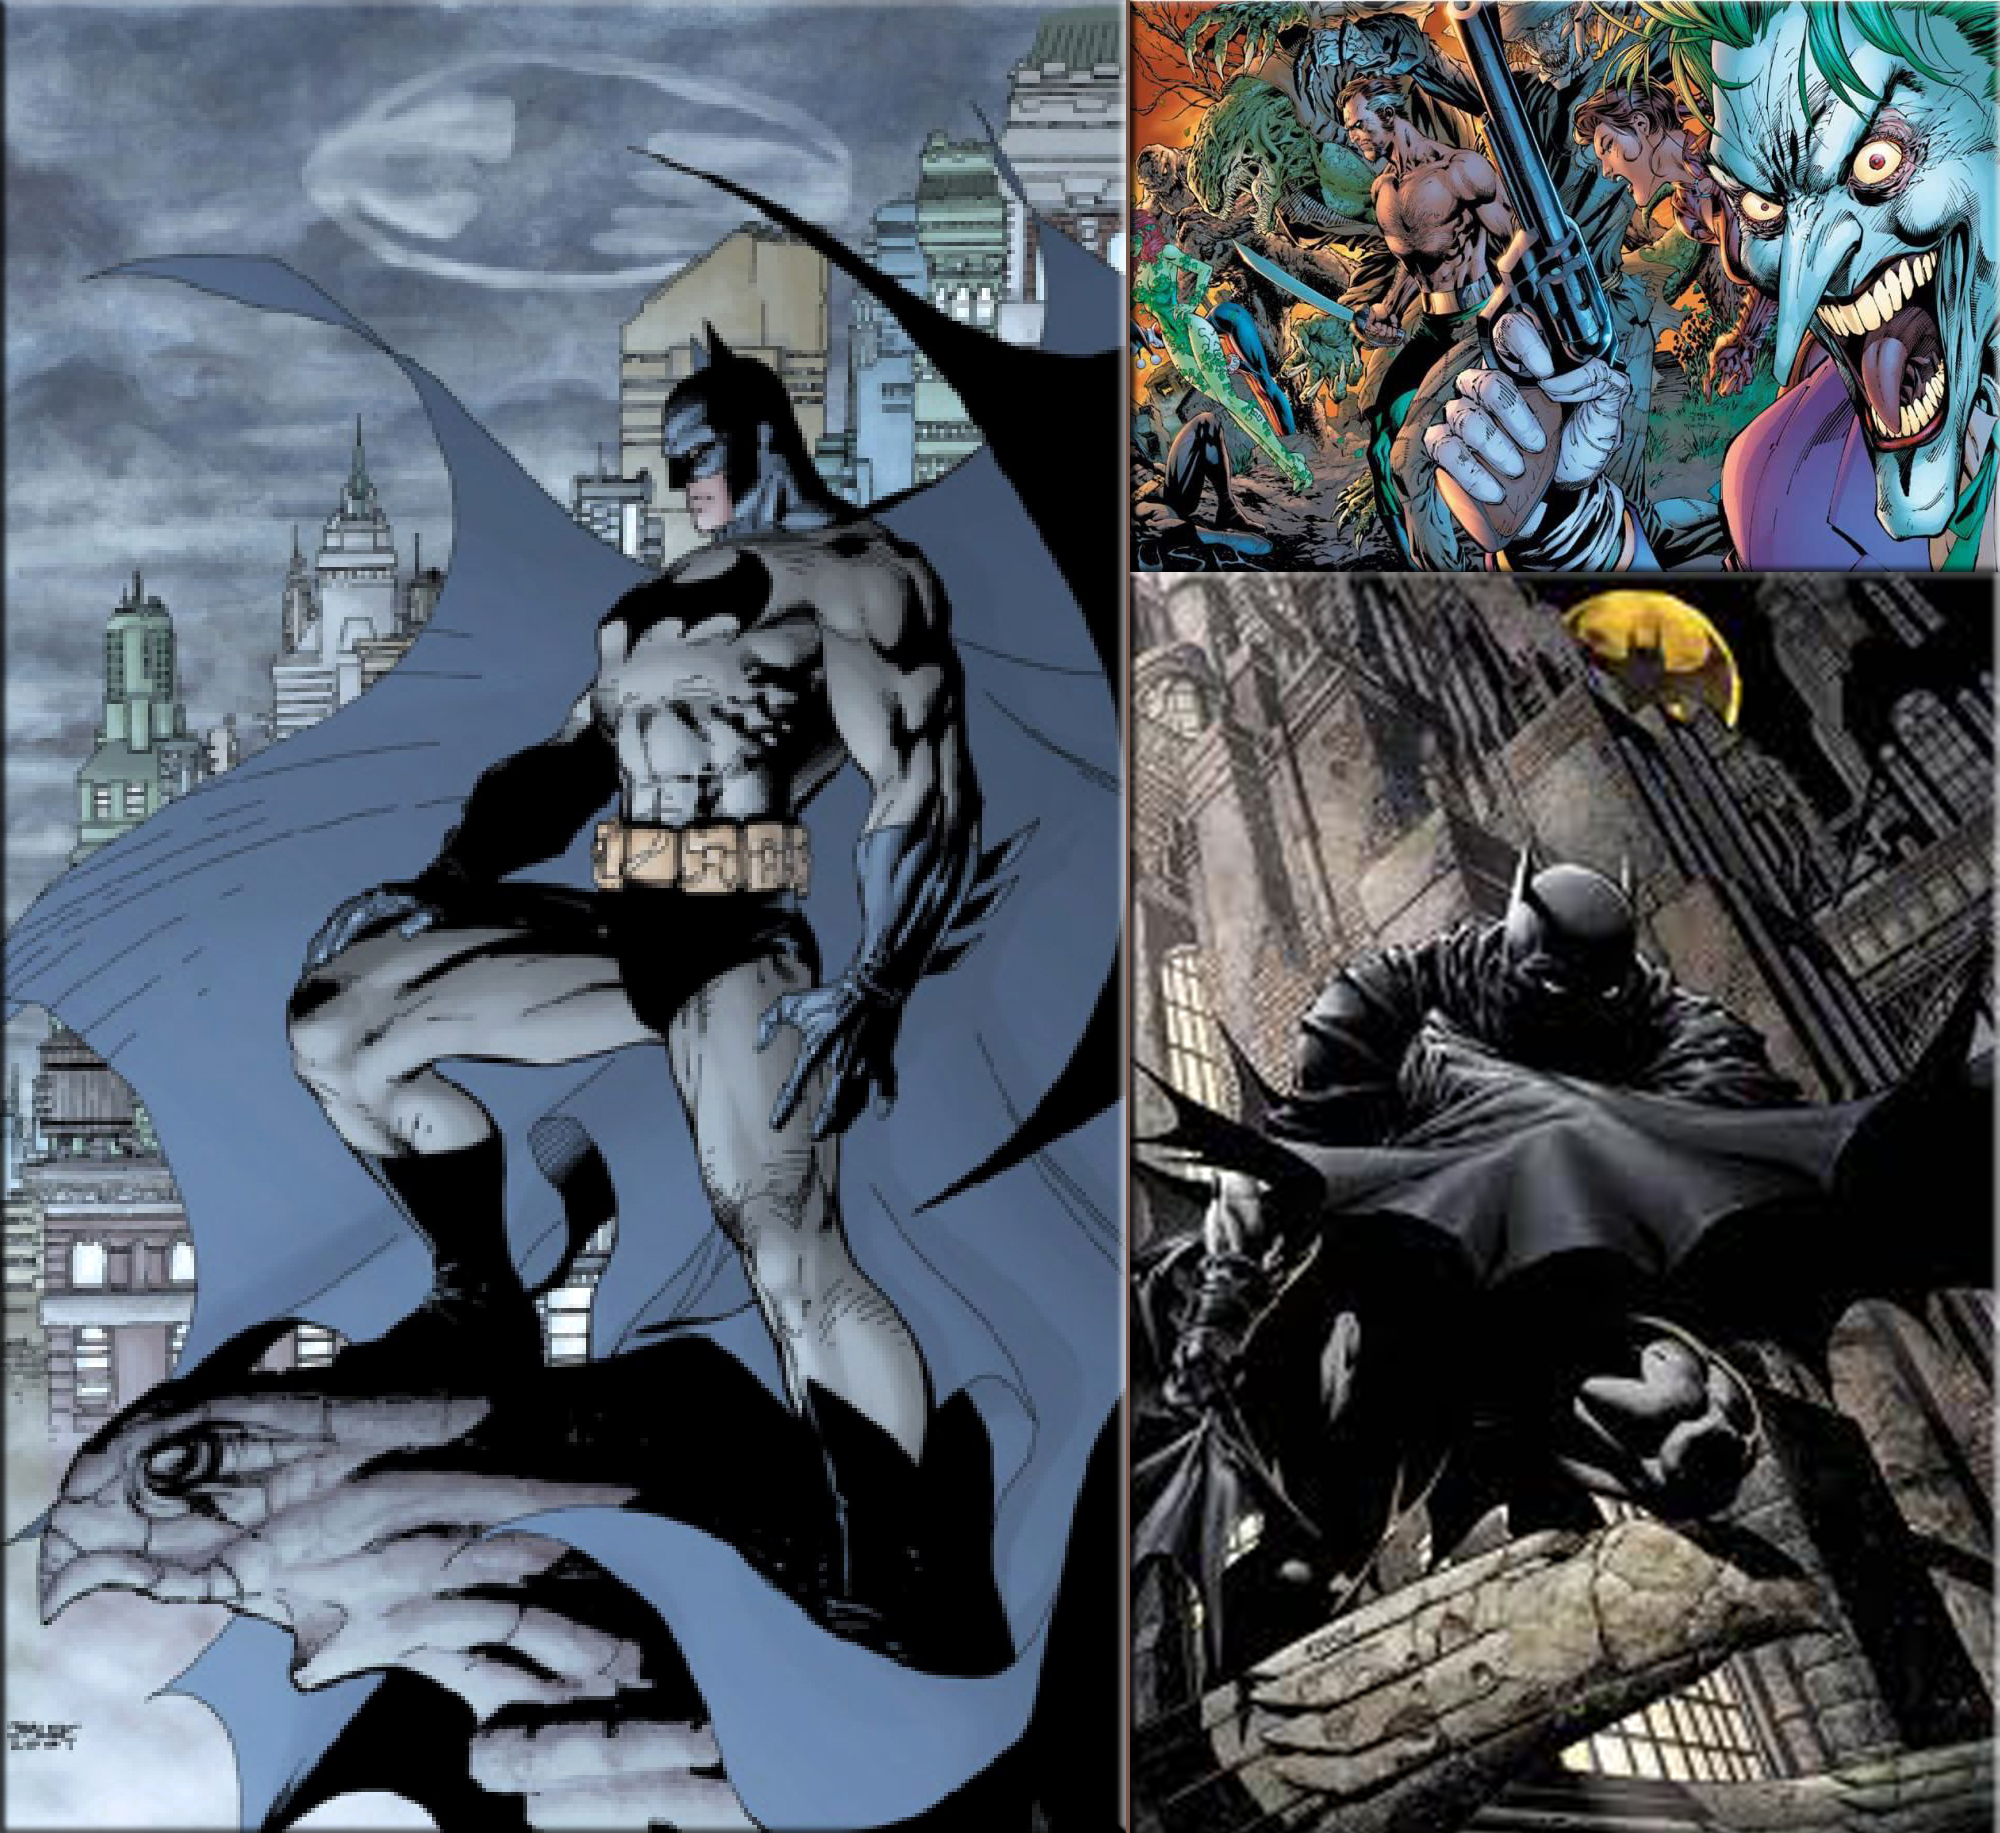 DC Comics publishes its second major superhero in Detective Comics #27; he is Batman, one of the most popular comic book superheroes of all time.